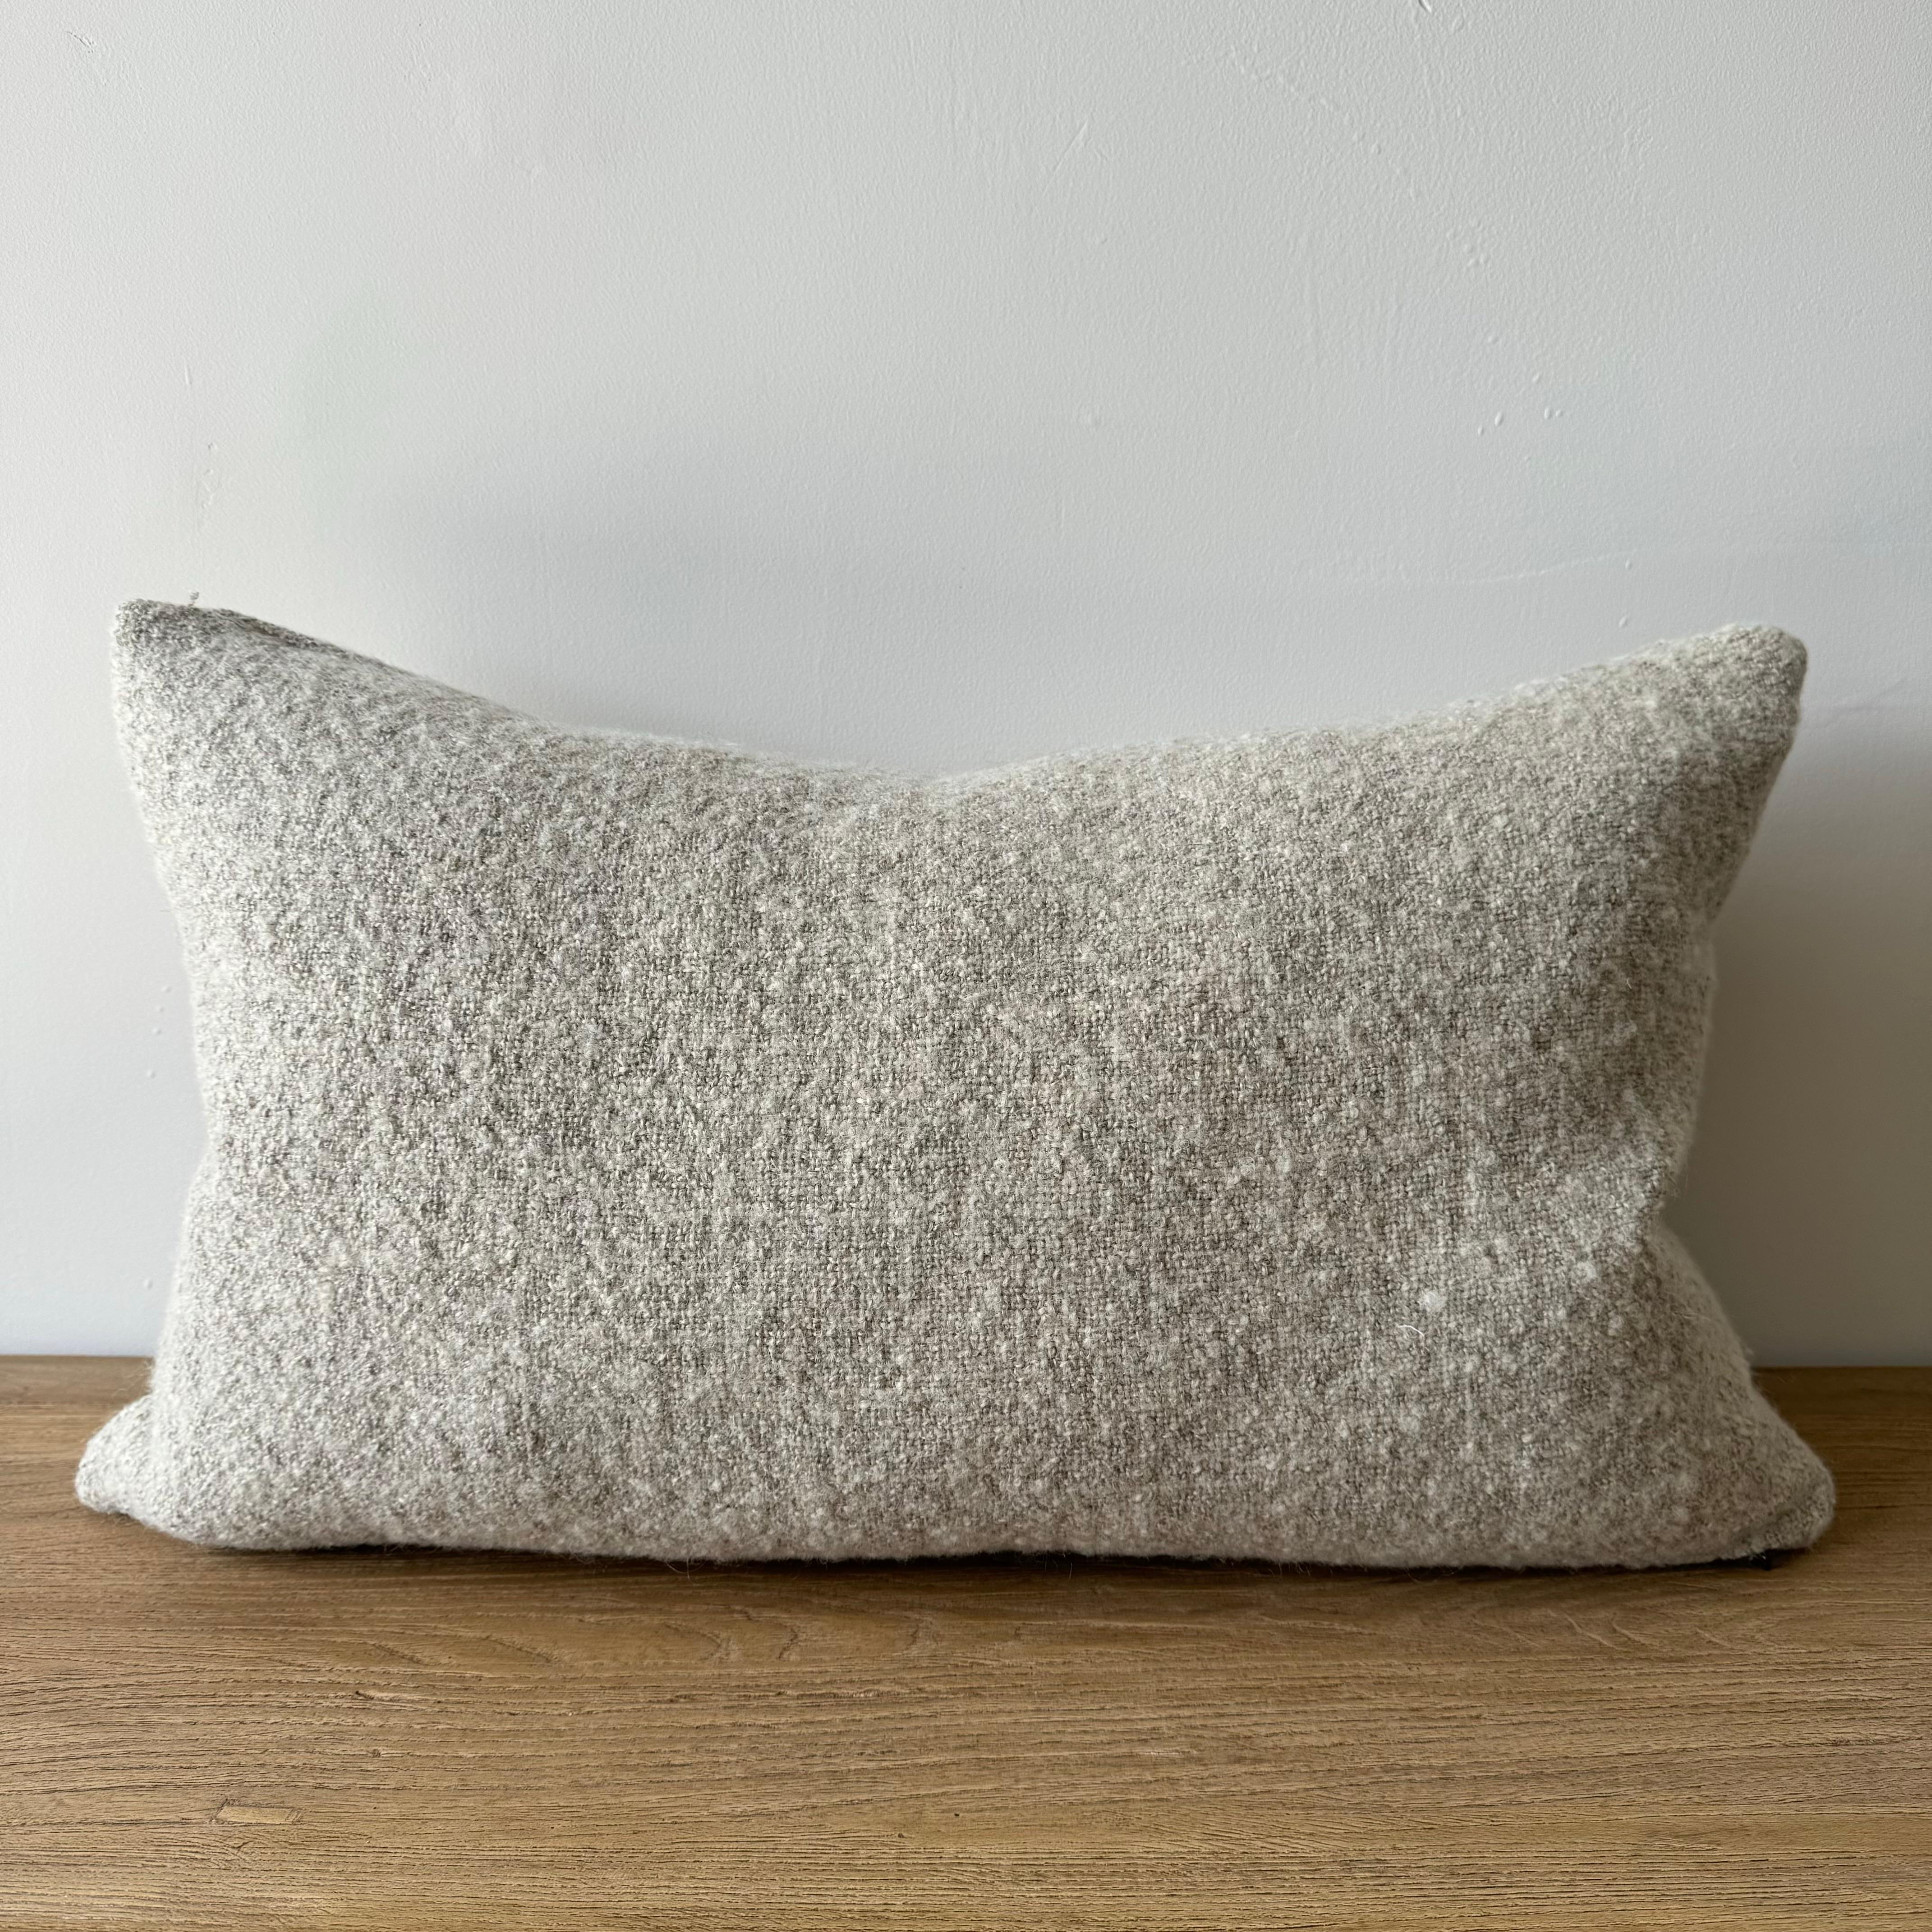 A soft natural flax oatmeal and beige woven fibers in a stonewash finish create this luxurious soft pillow. Sewn with an antique brass zipper closure and overlocked edges.
Includes a down/ feather insert.
Size: 15